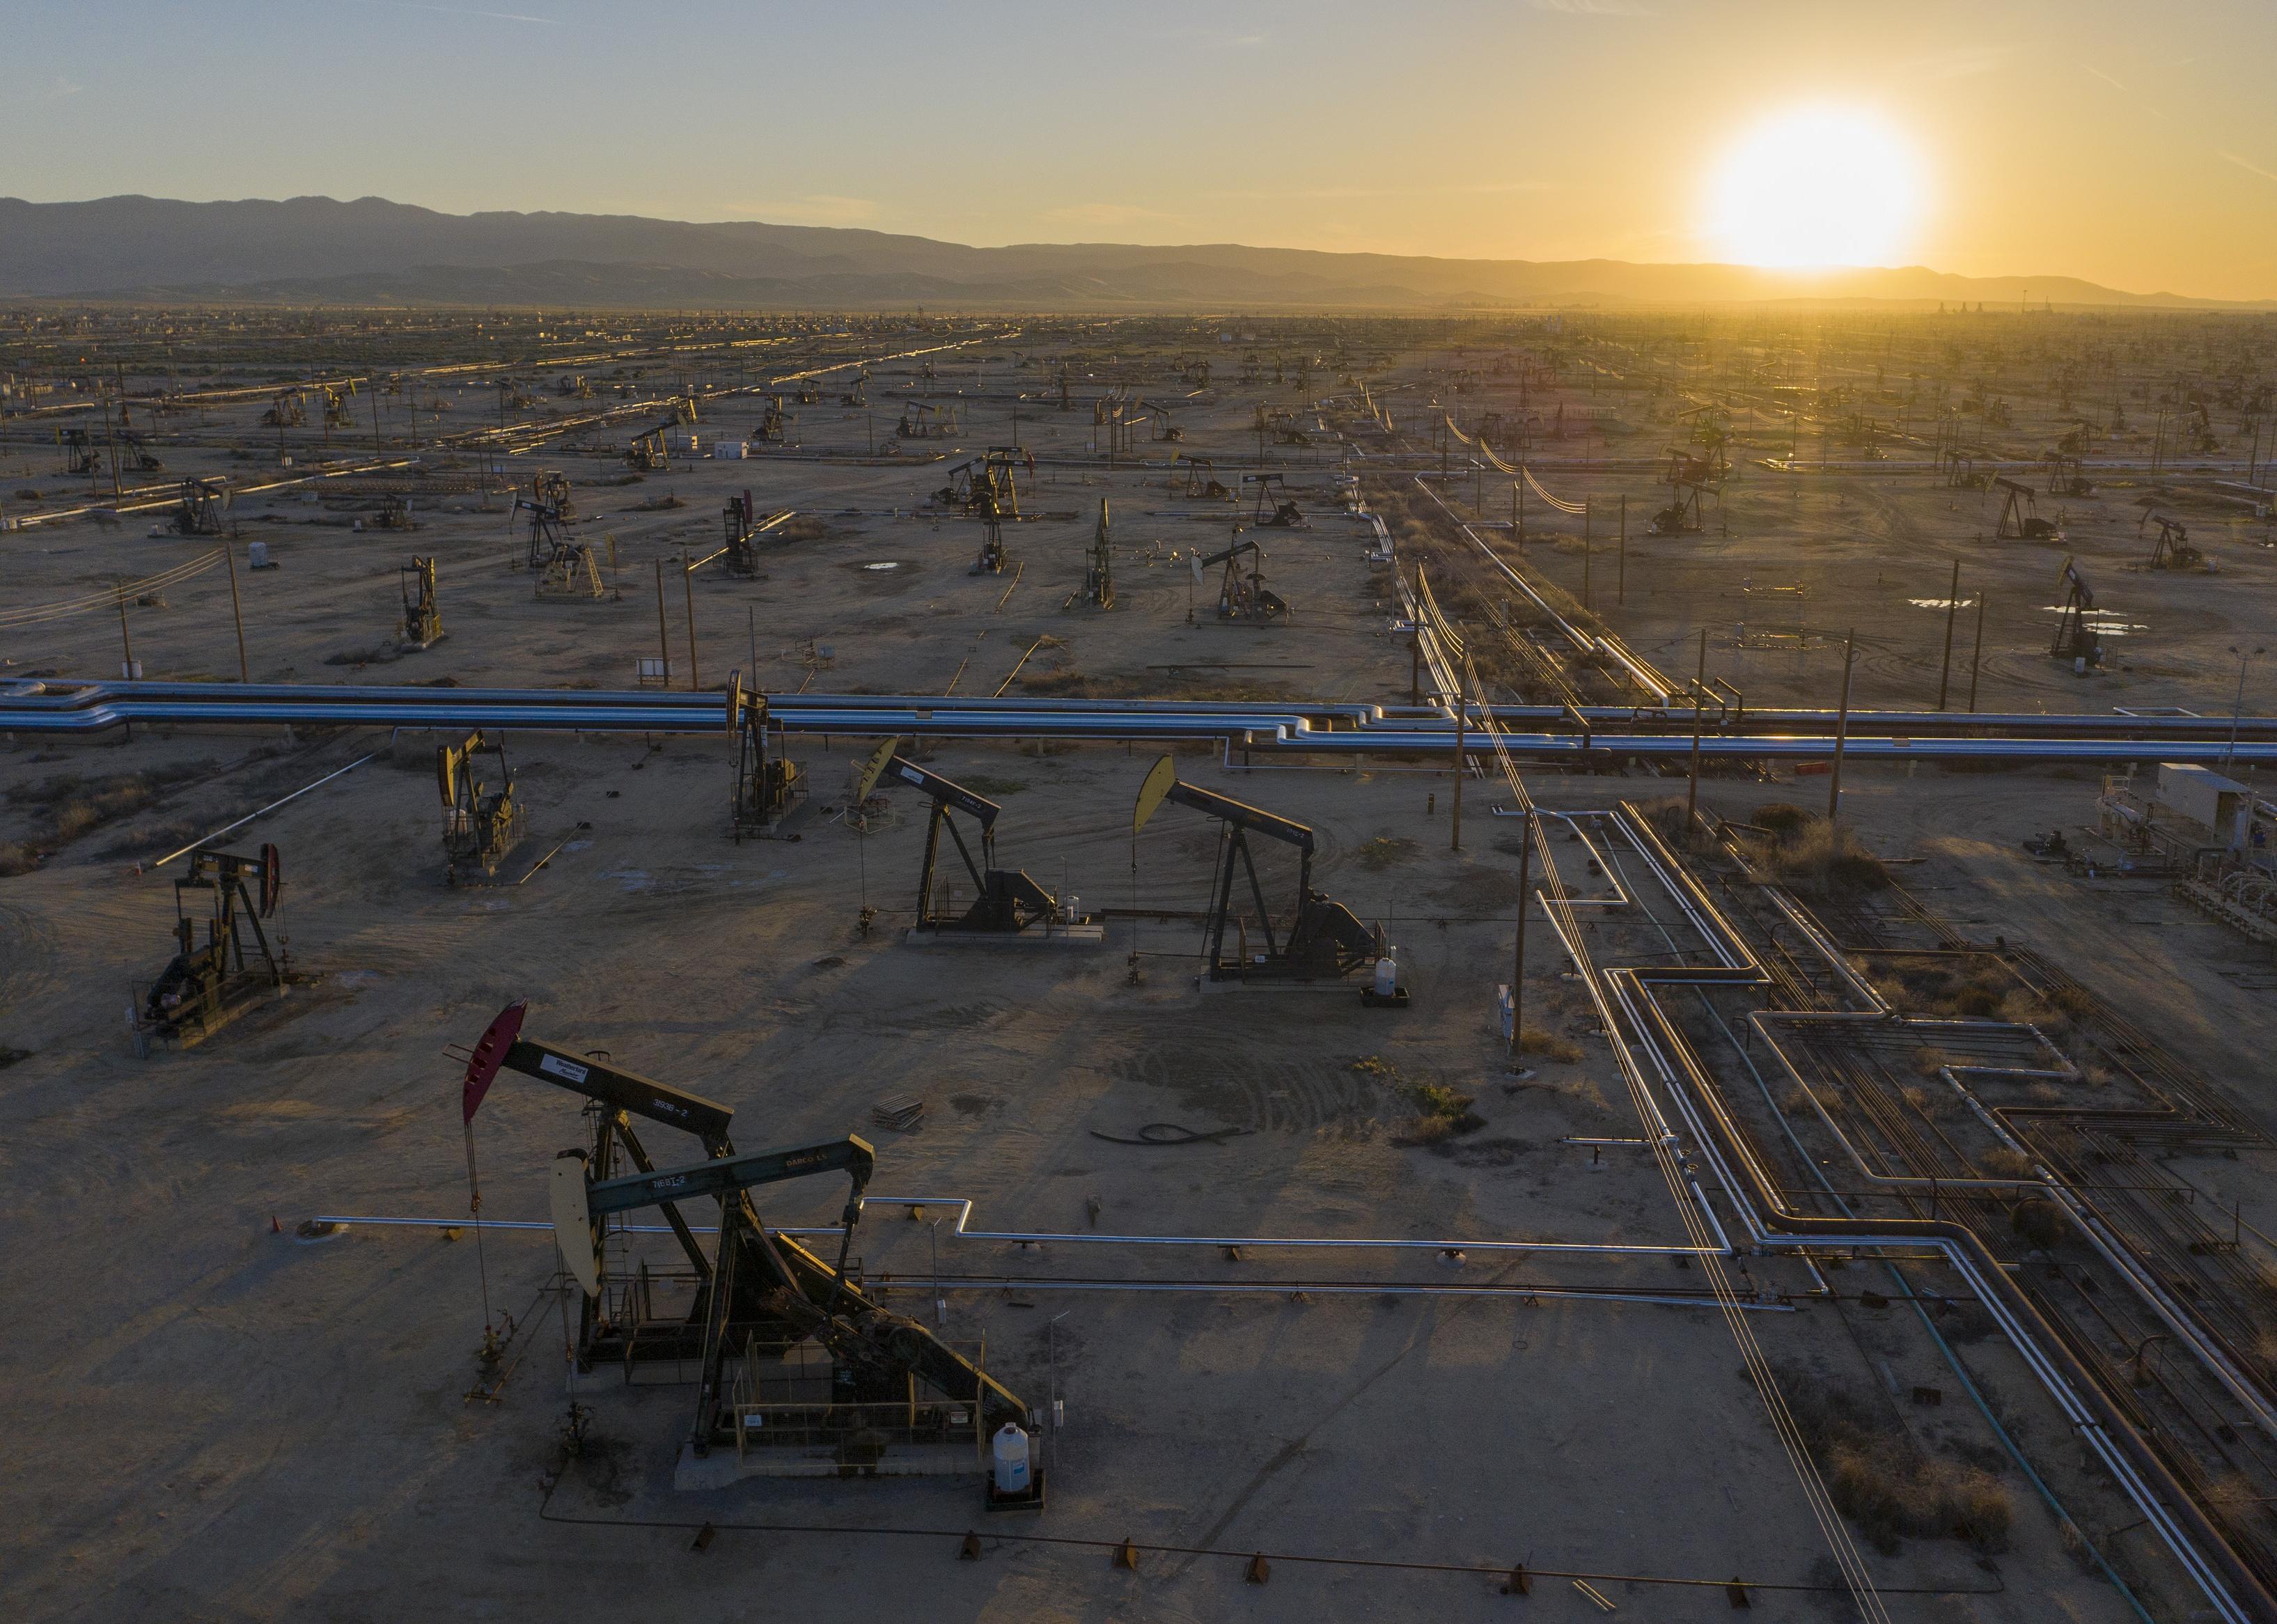 A massive oil field of pumpjacks and pipelines in California with mountains in the background.